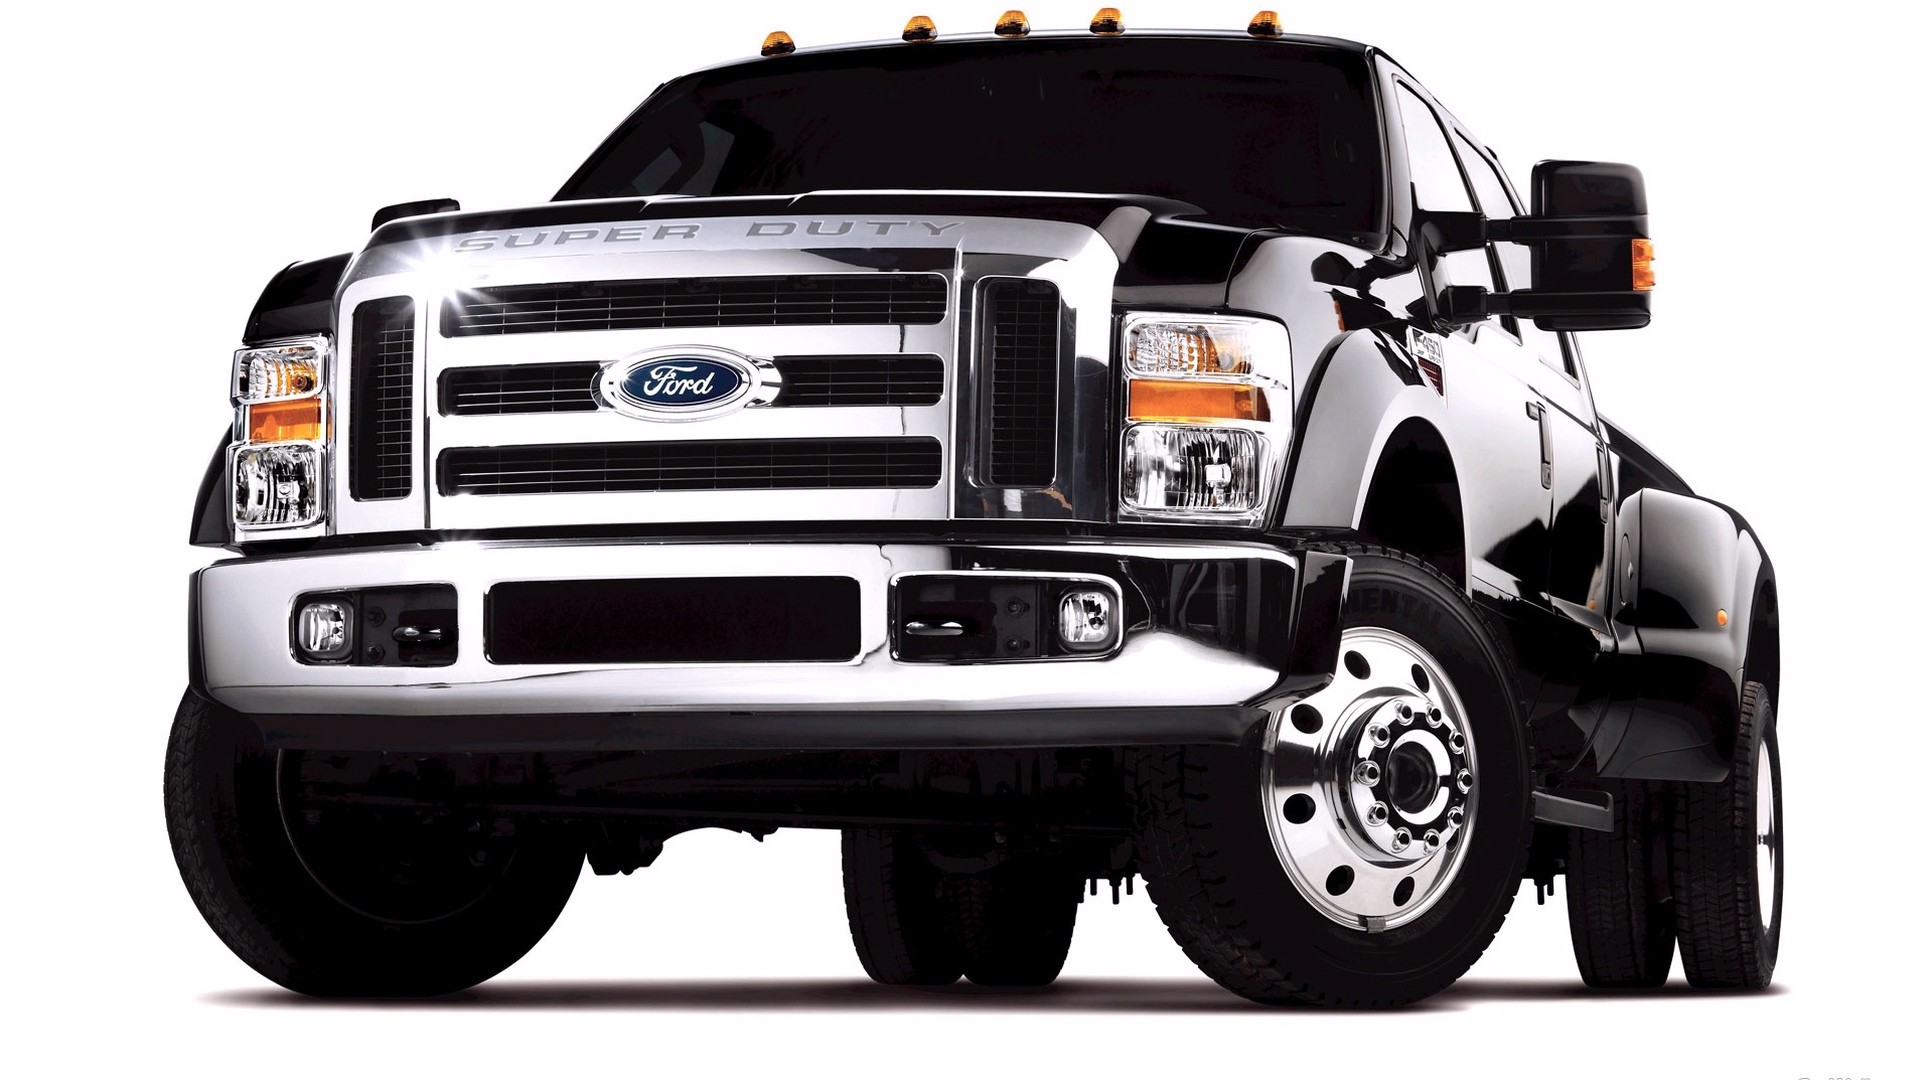 New Ford Truck Photos View #806210 Wallpapers | RiseWLP